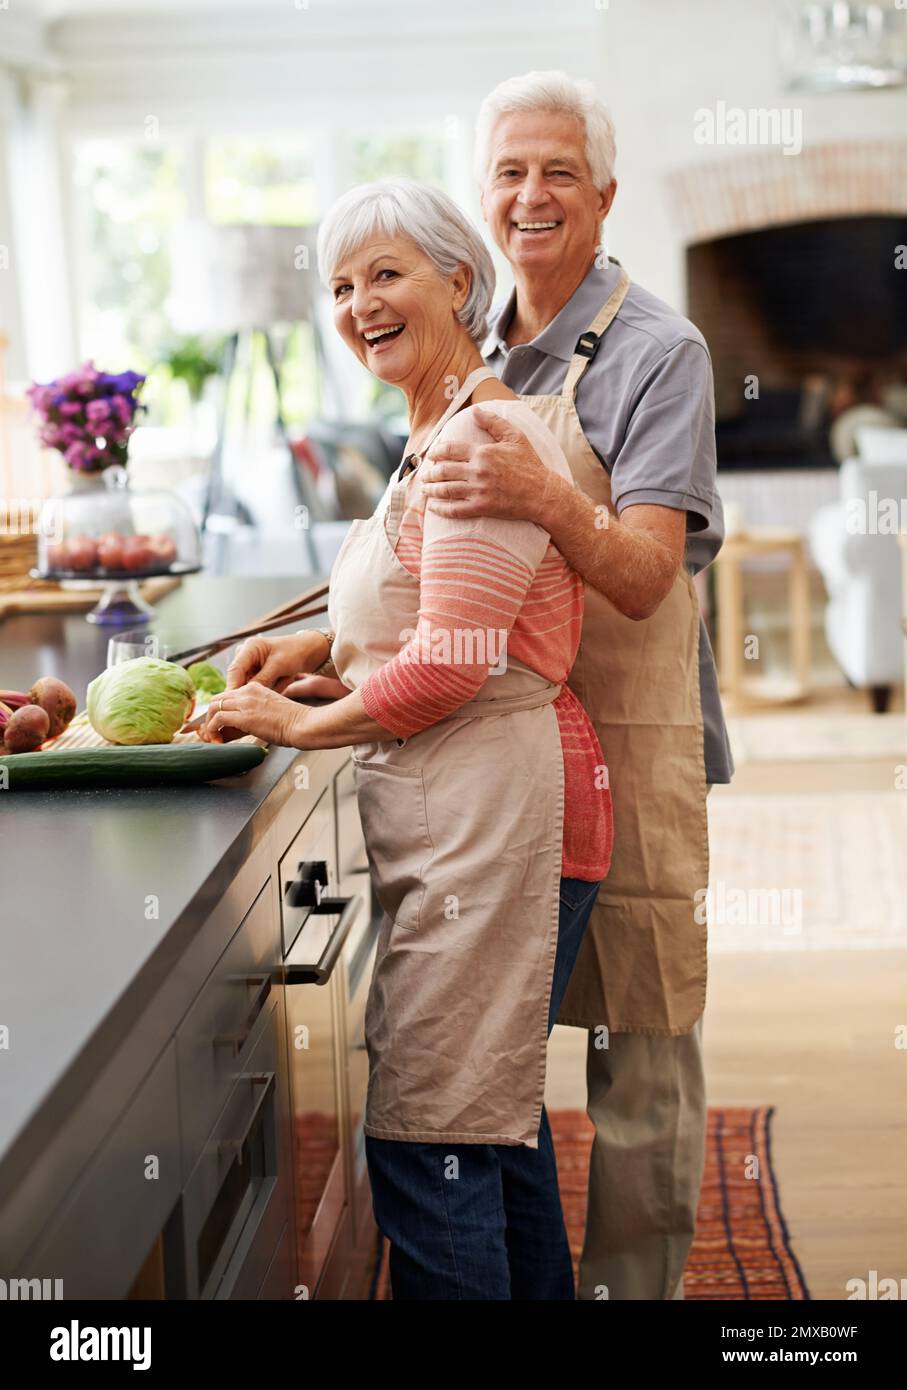 He keeps passing me the wrong utensils. Romantic shot of a couple sharing duties in the kitchen. Stock Photo